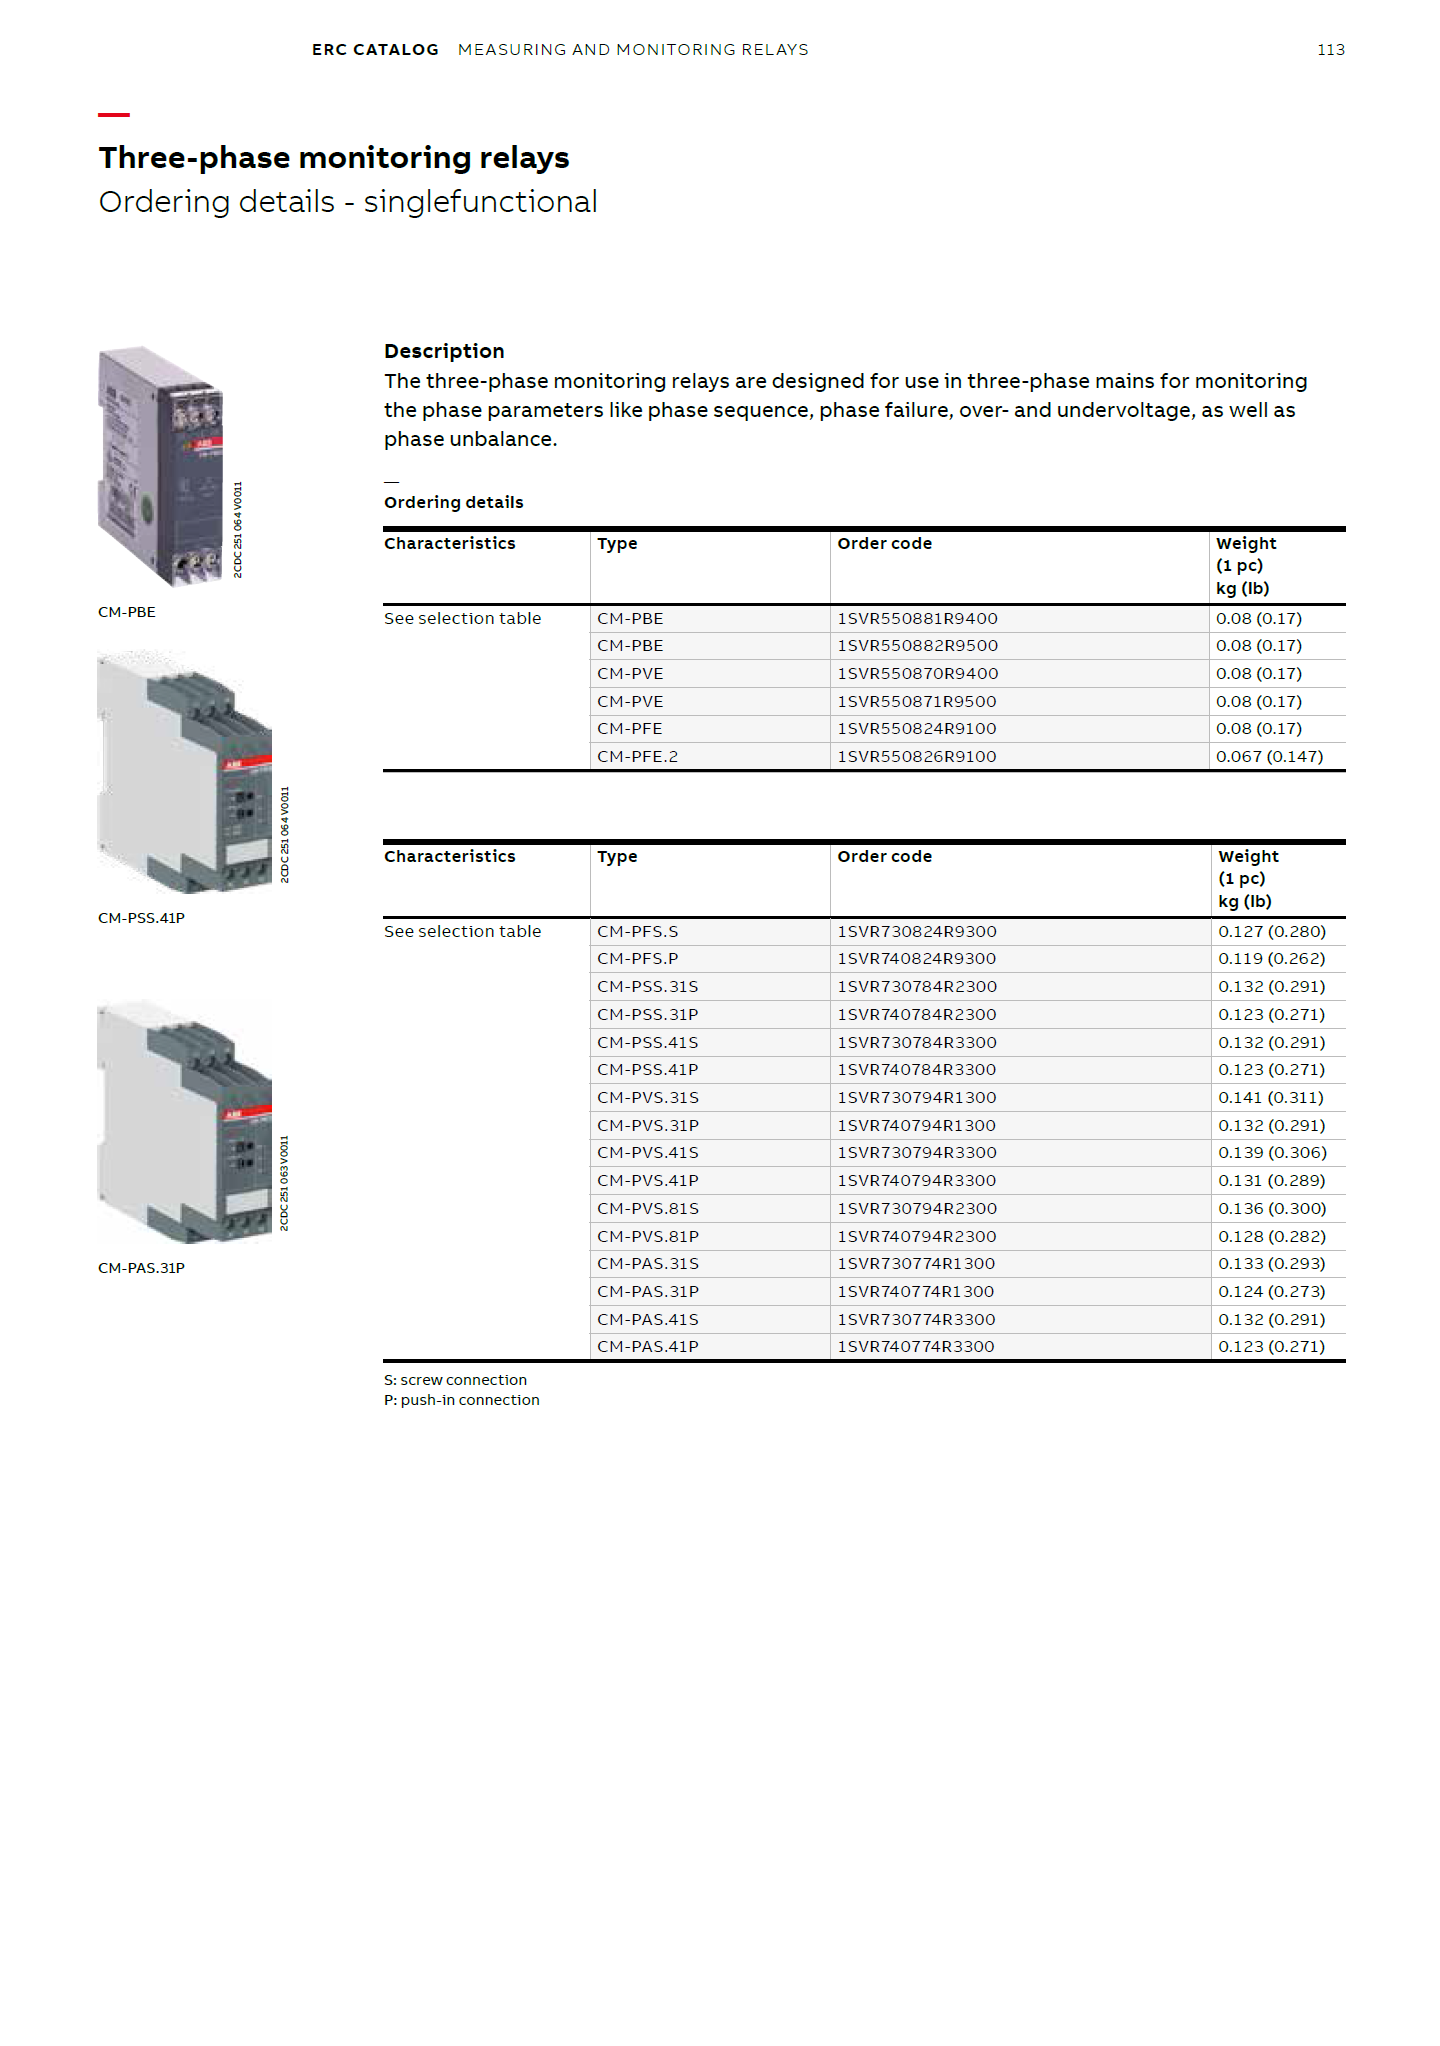 ABB multifunctional three-phase monitoring relays CM-MPS.31S